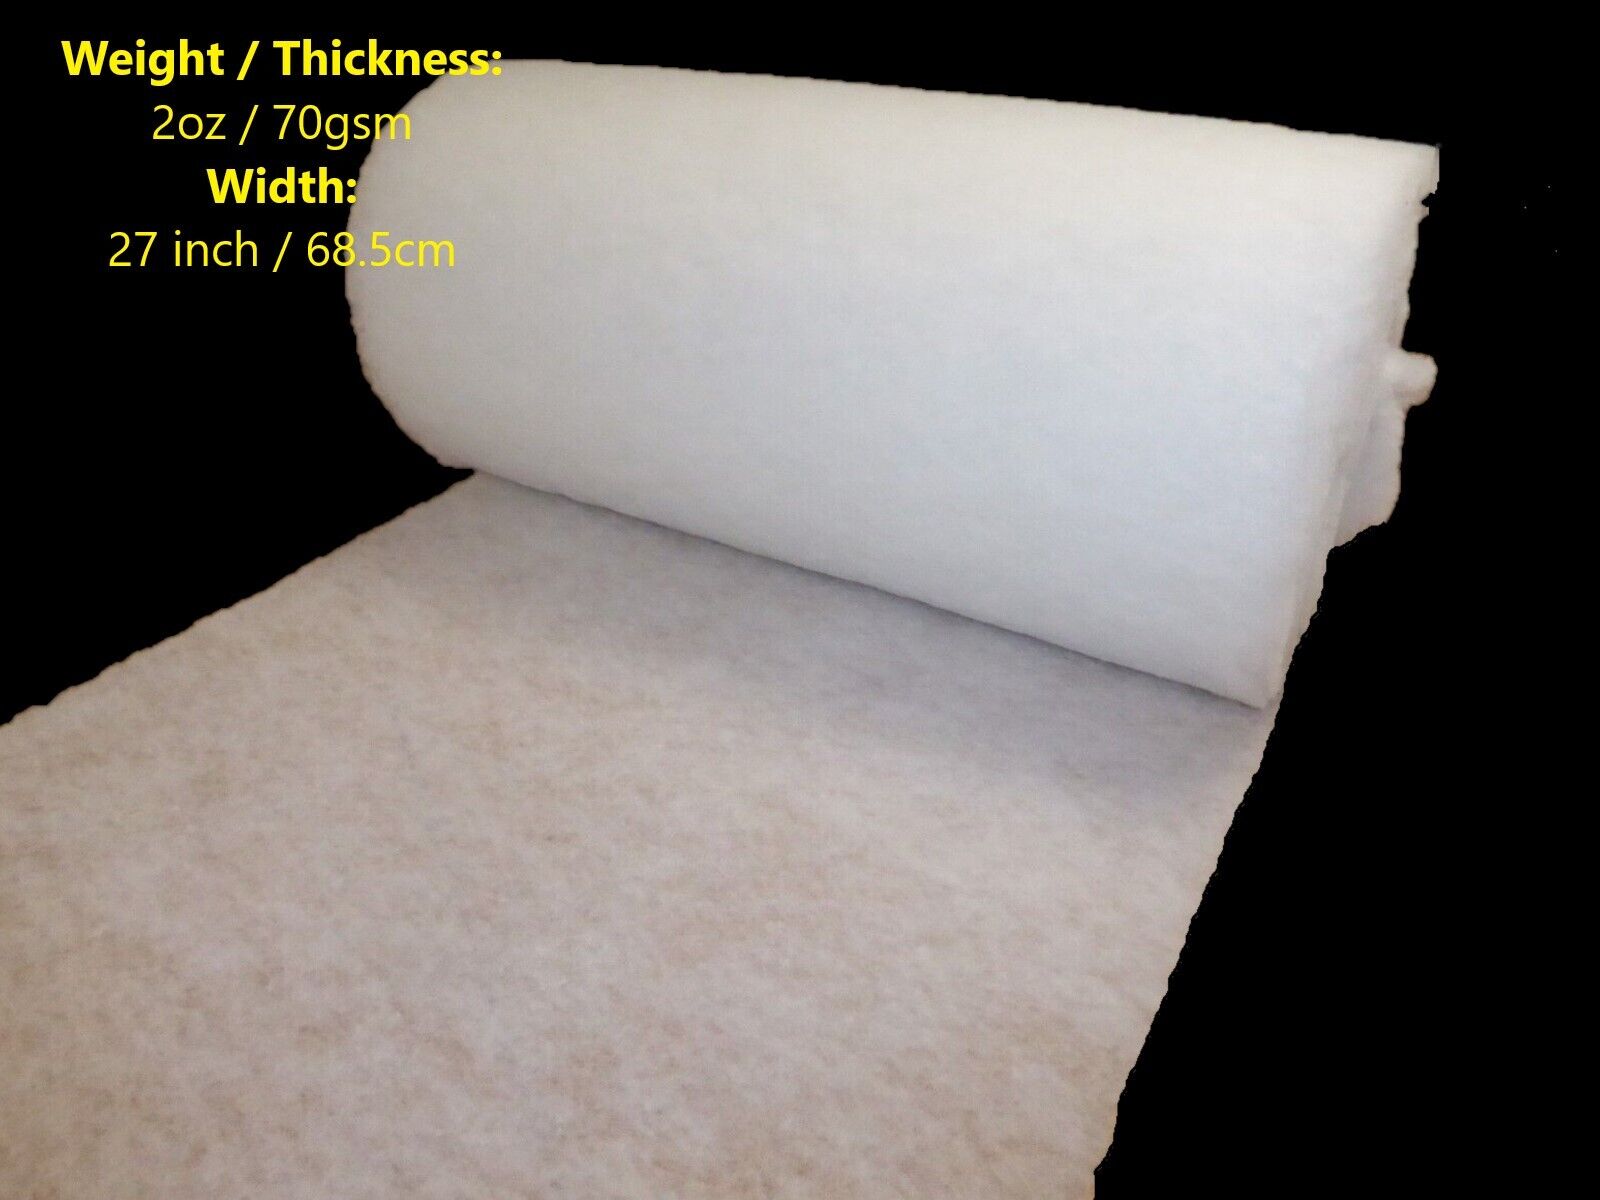 50 metres of 2oz Polyester Wadding Dacron - Upholstery Quilting Batting -  27 inches wide